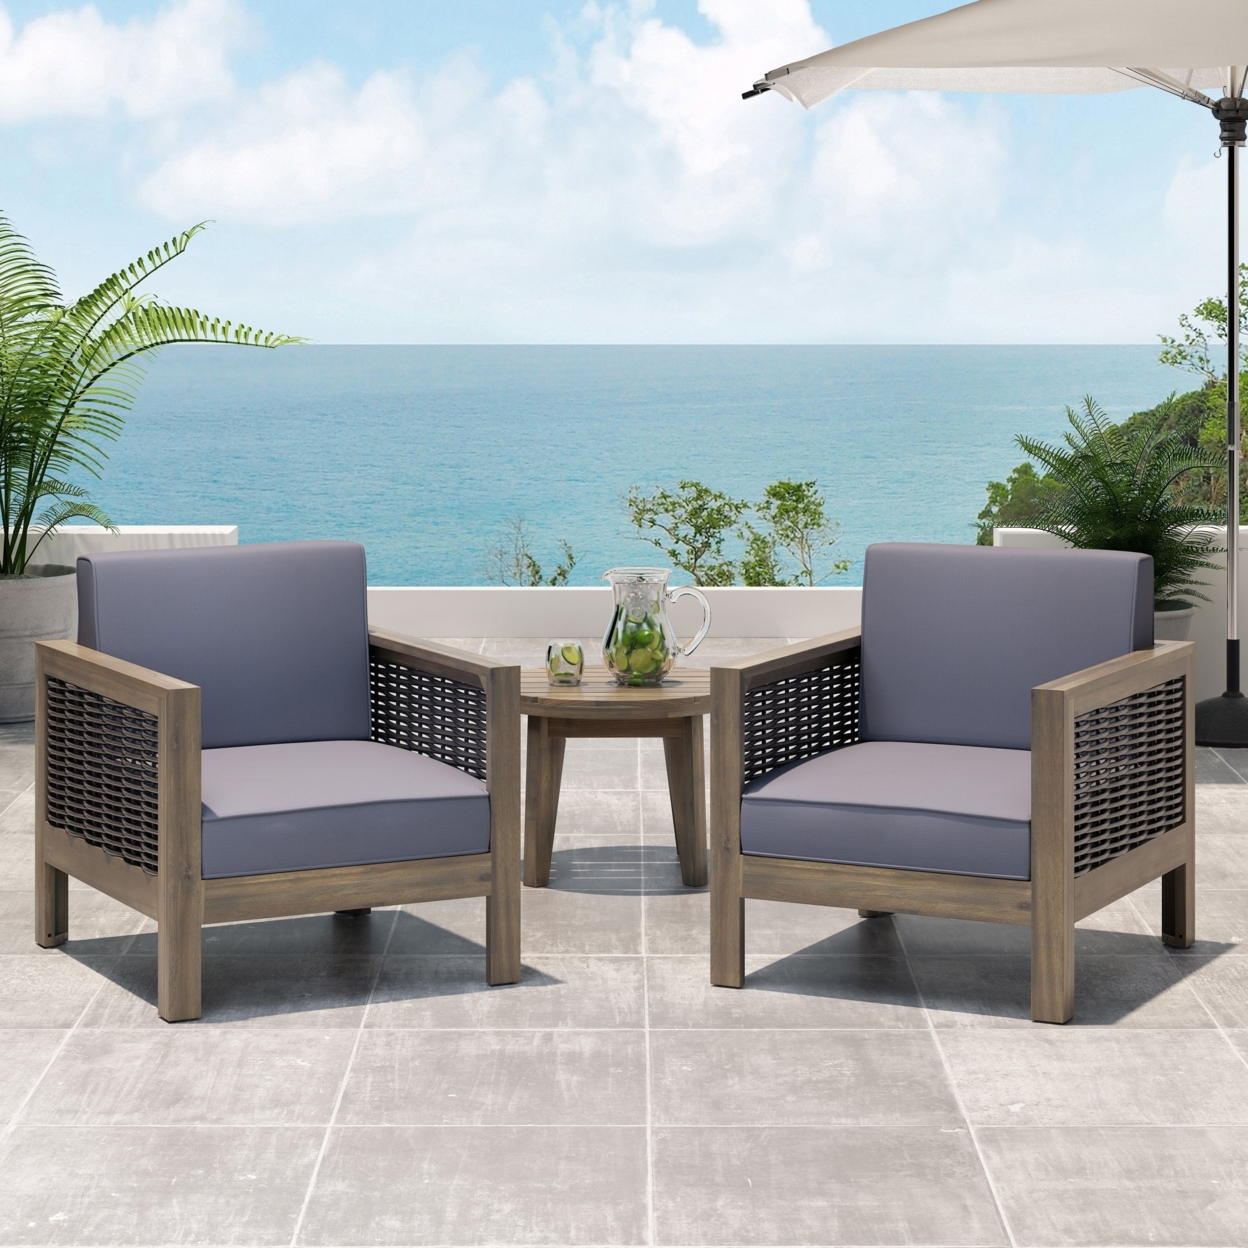 Mayes Outdoor Acacia Wood Club Chair With Wicker Accents (Set Of 2) - Gray/mixed Gray/dark Gray